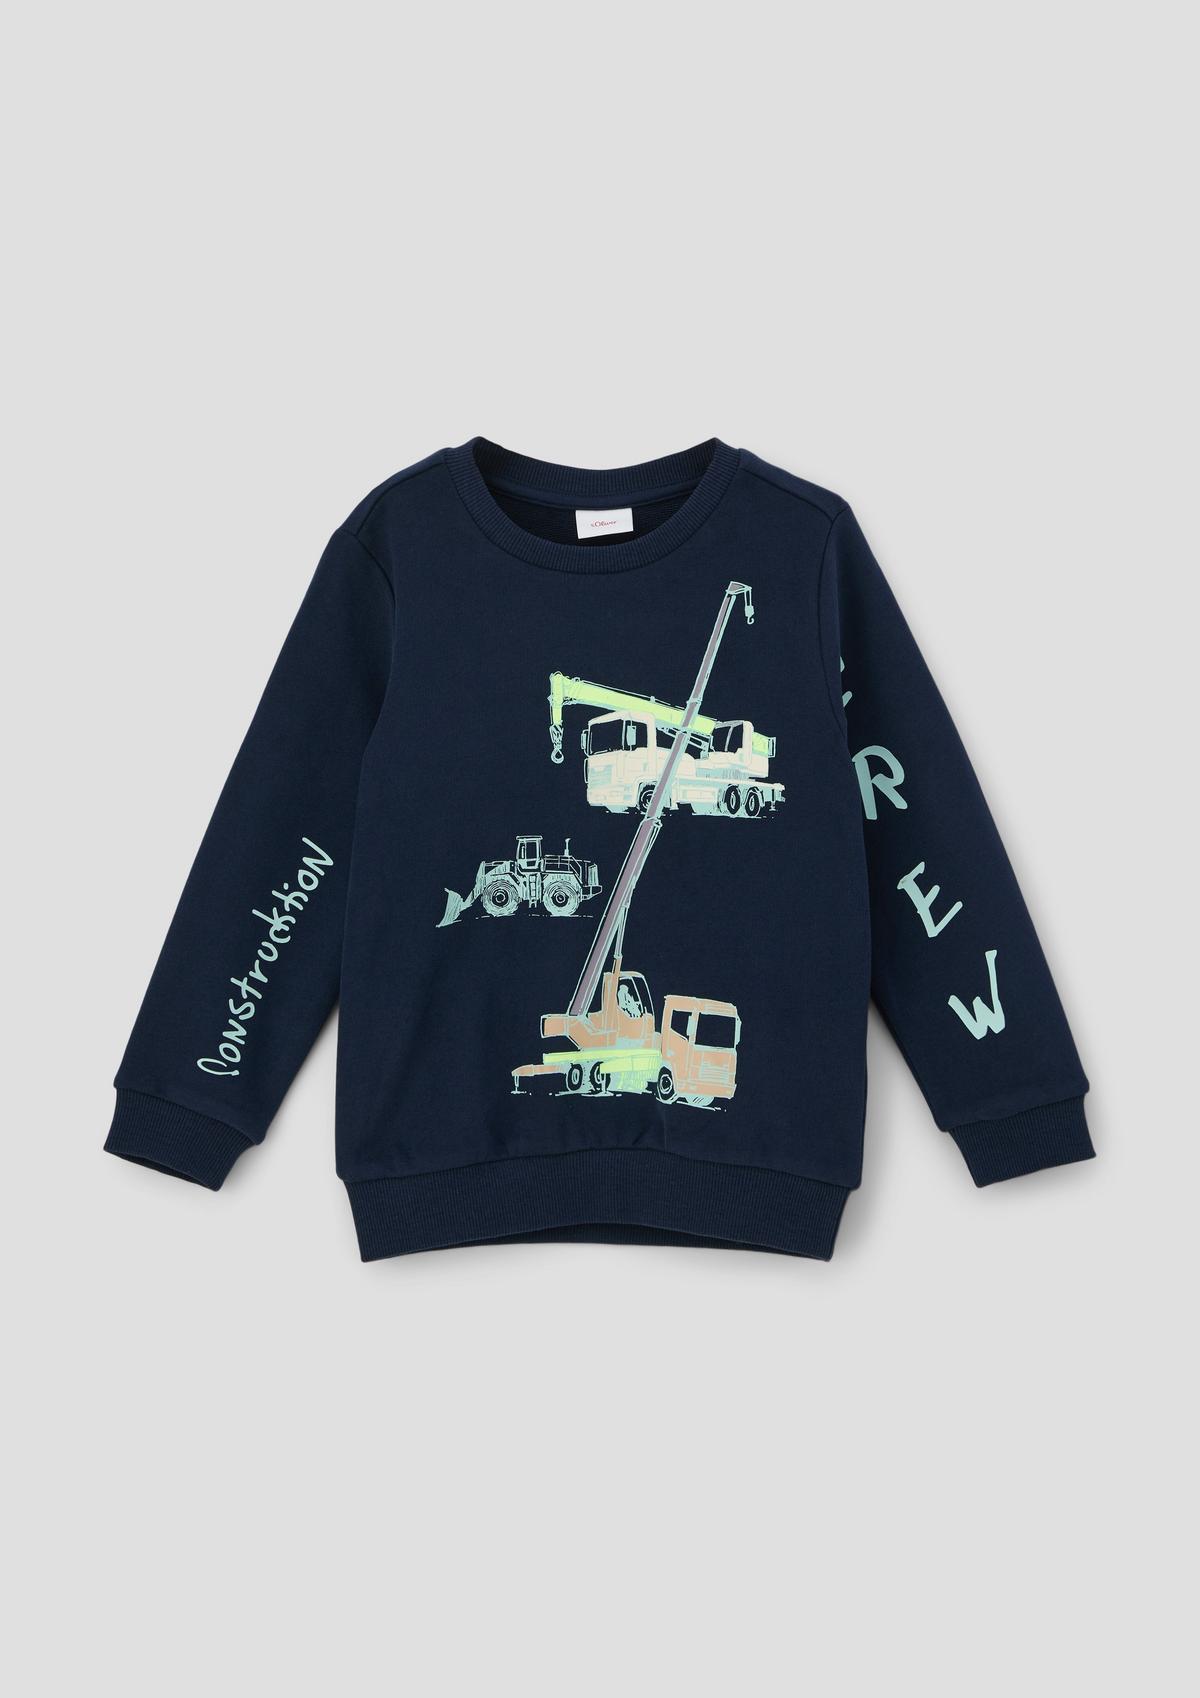 knitwear and Sweatshirts for boys online